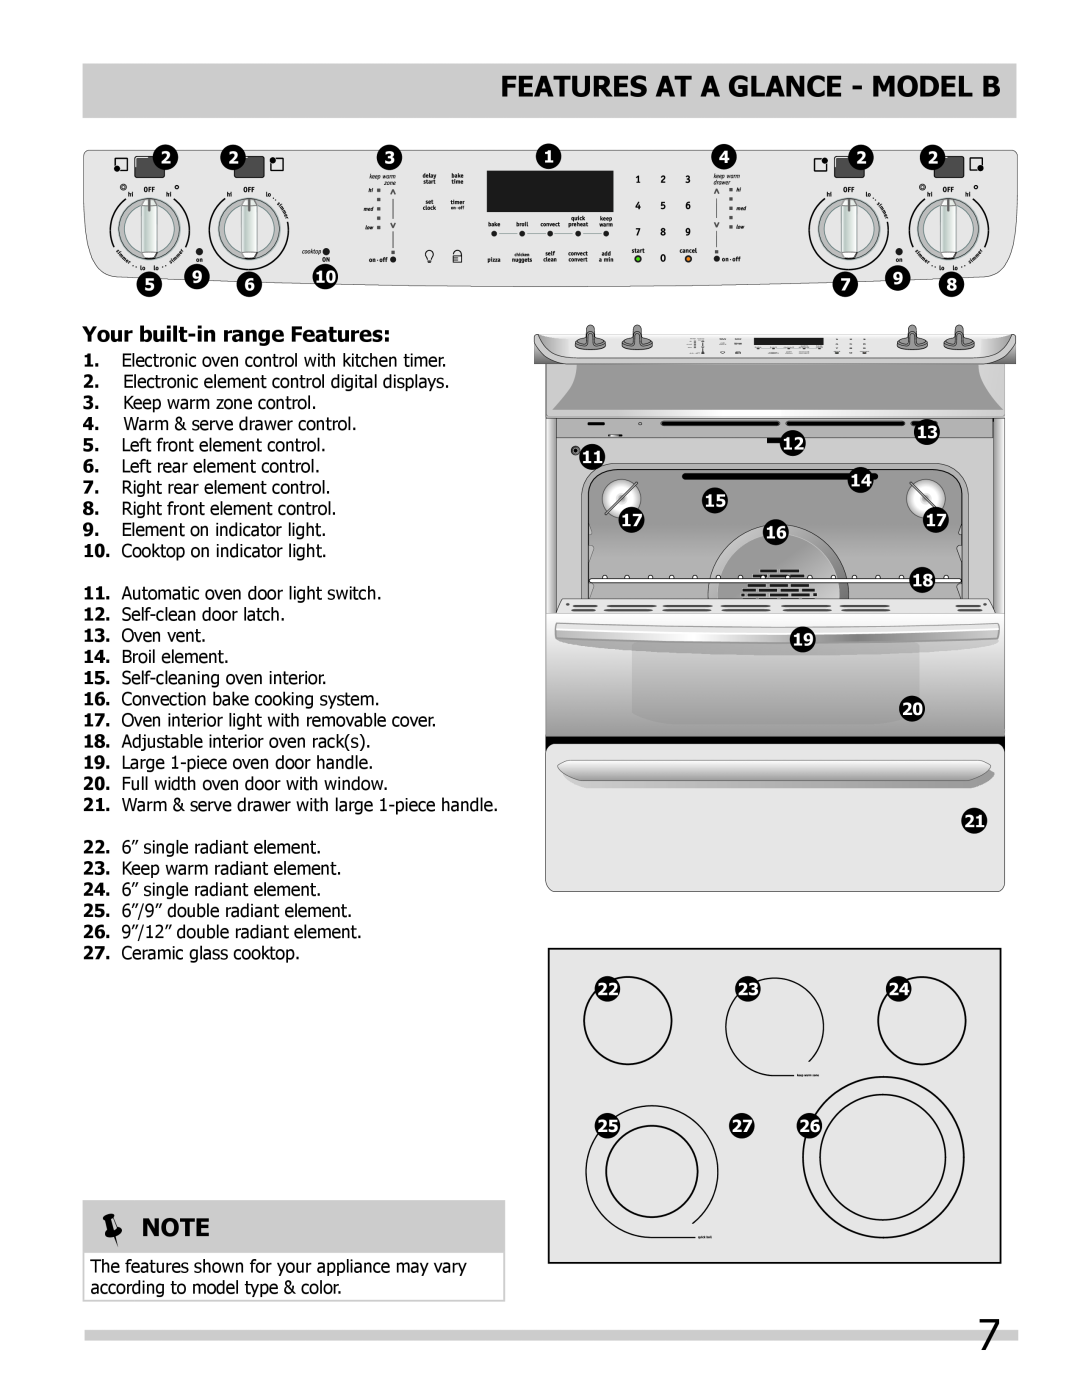 Frigidaire FGES3065KF, FGES3065KB, FGES3045KF Features At A Glance - Model B, 1519,  Note, Your built-in range Features 